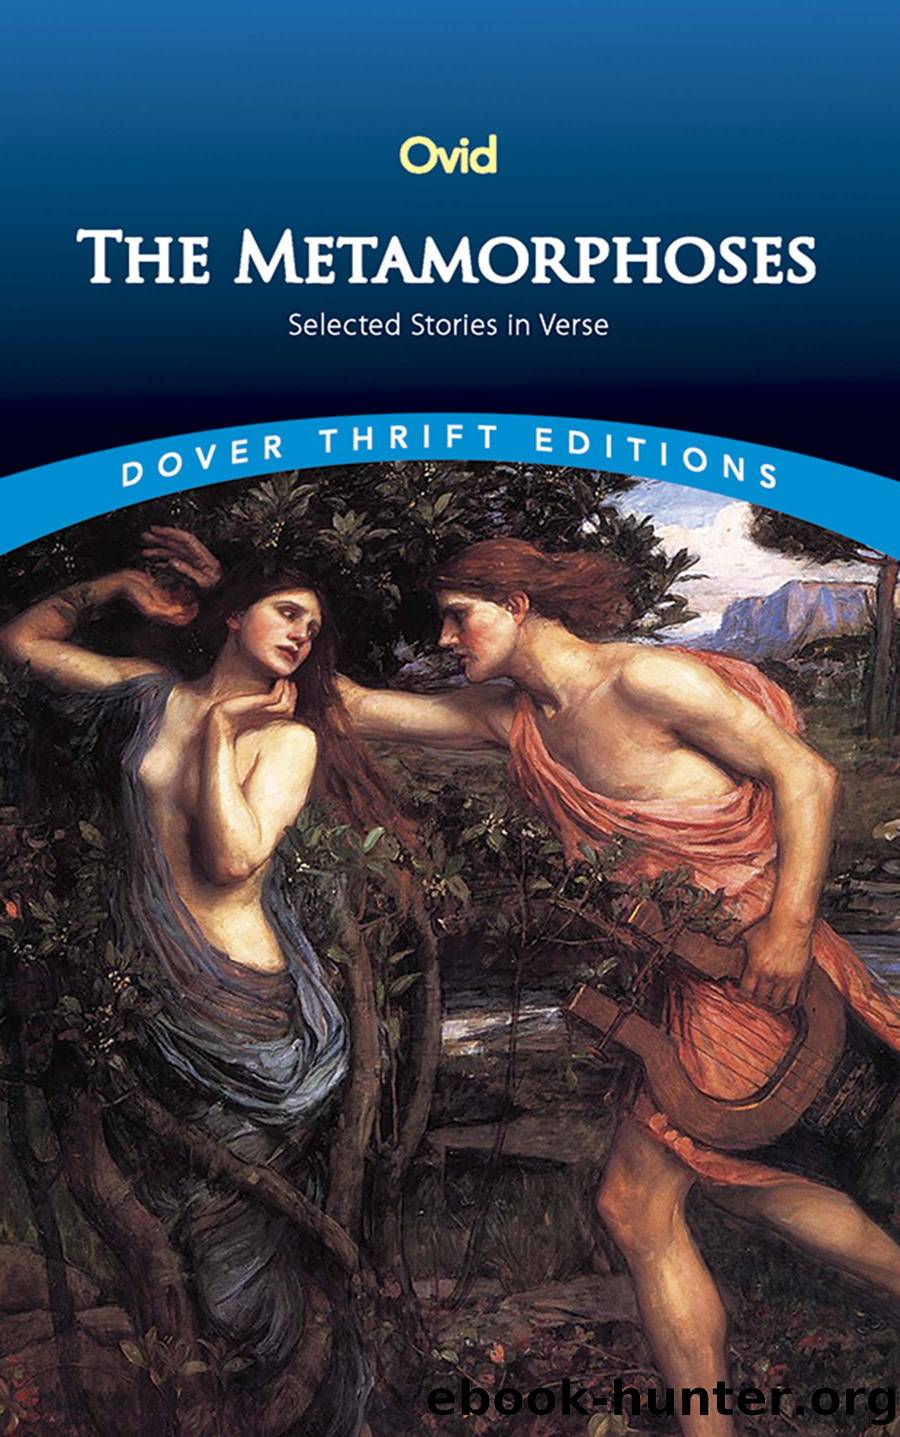 The Metamorphoses by Ovid & Dover Thrift Editions